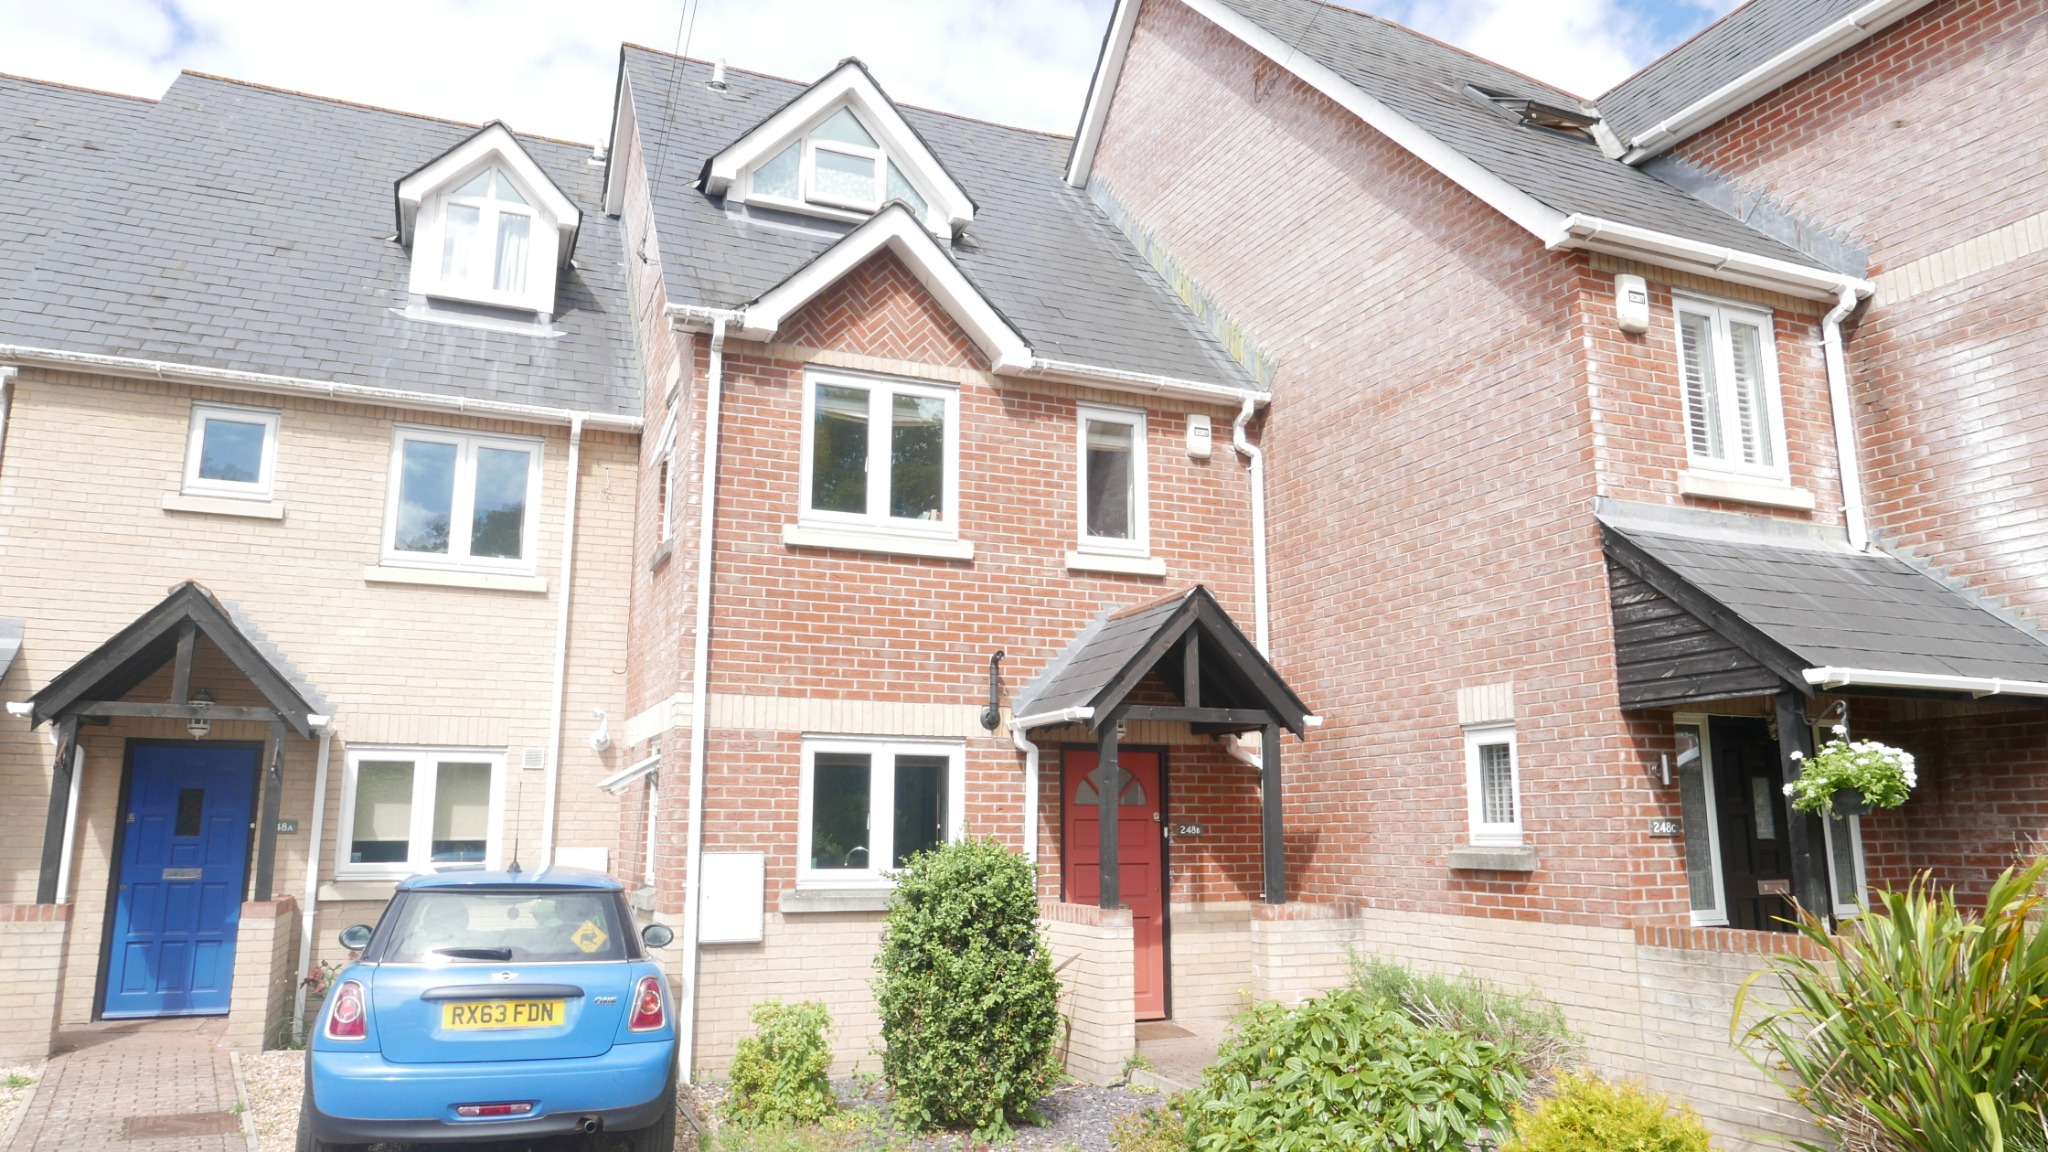 3 bed Town House for rent in Southampton. From Pearsons estate Agents - Southampton